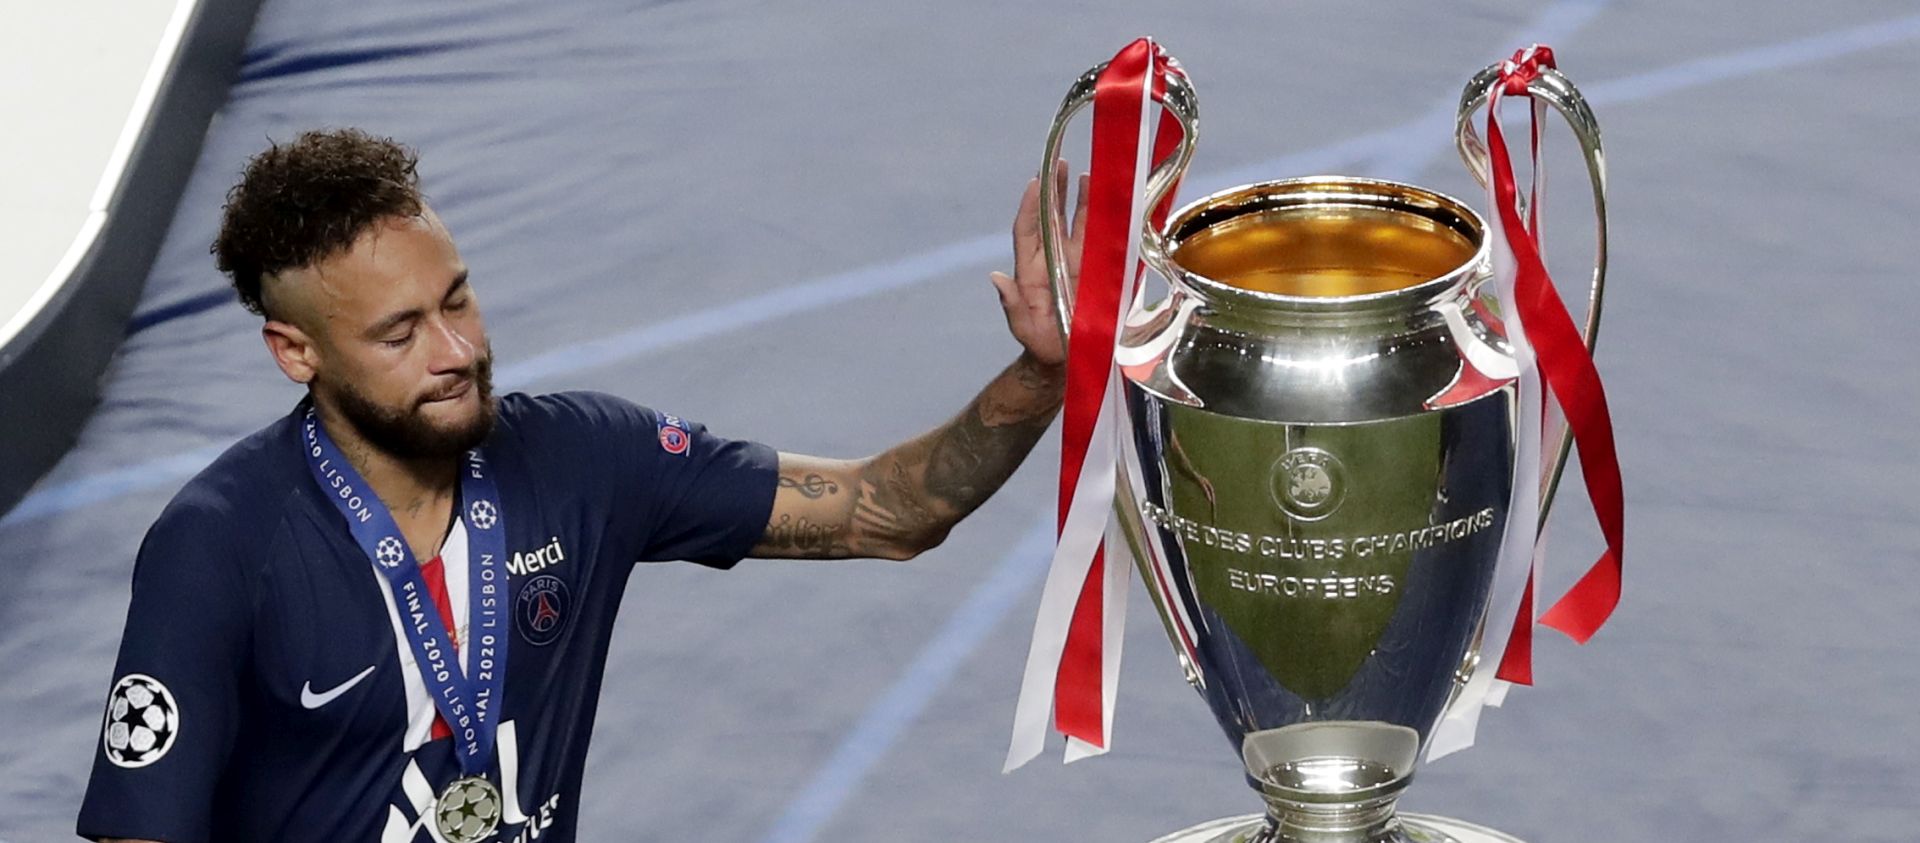 epa08620908 Neymar of PSG touches the trophy after receiving his runner-up medal after the UEFA Champions League final between Paris Saint-Germain and Bayern Munich in Lisbon, Portugal, 23 August 2020. PSG lost 0-1.  EPA/Manu Fernandez / POOL